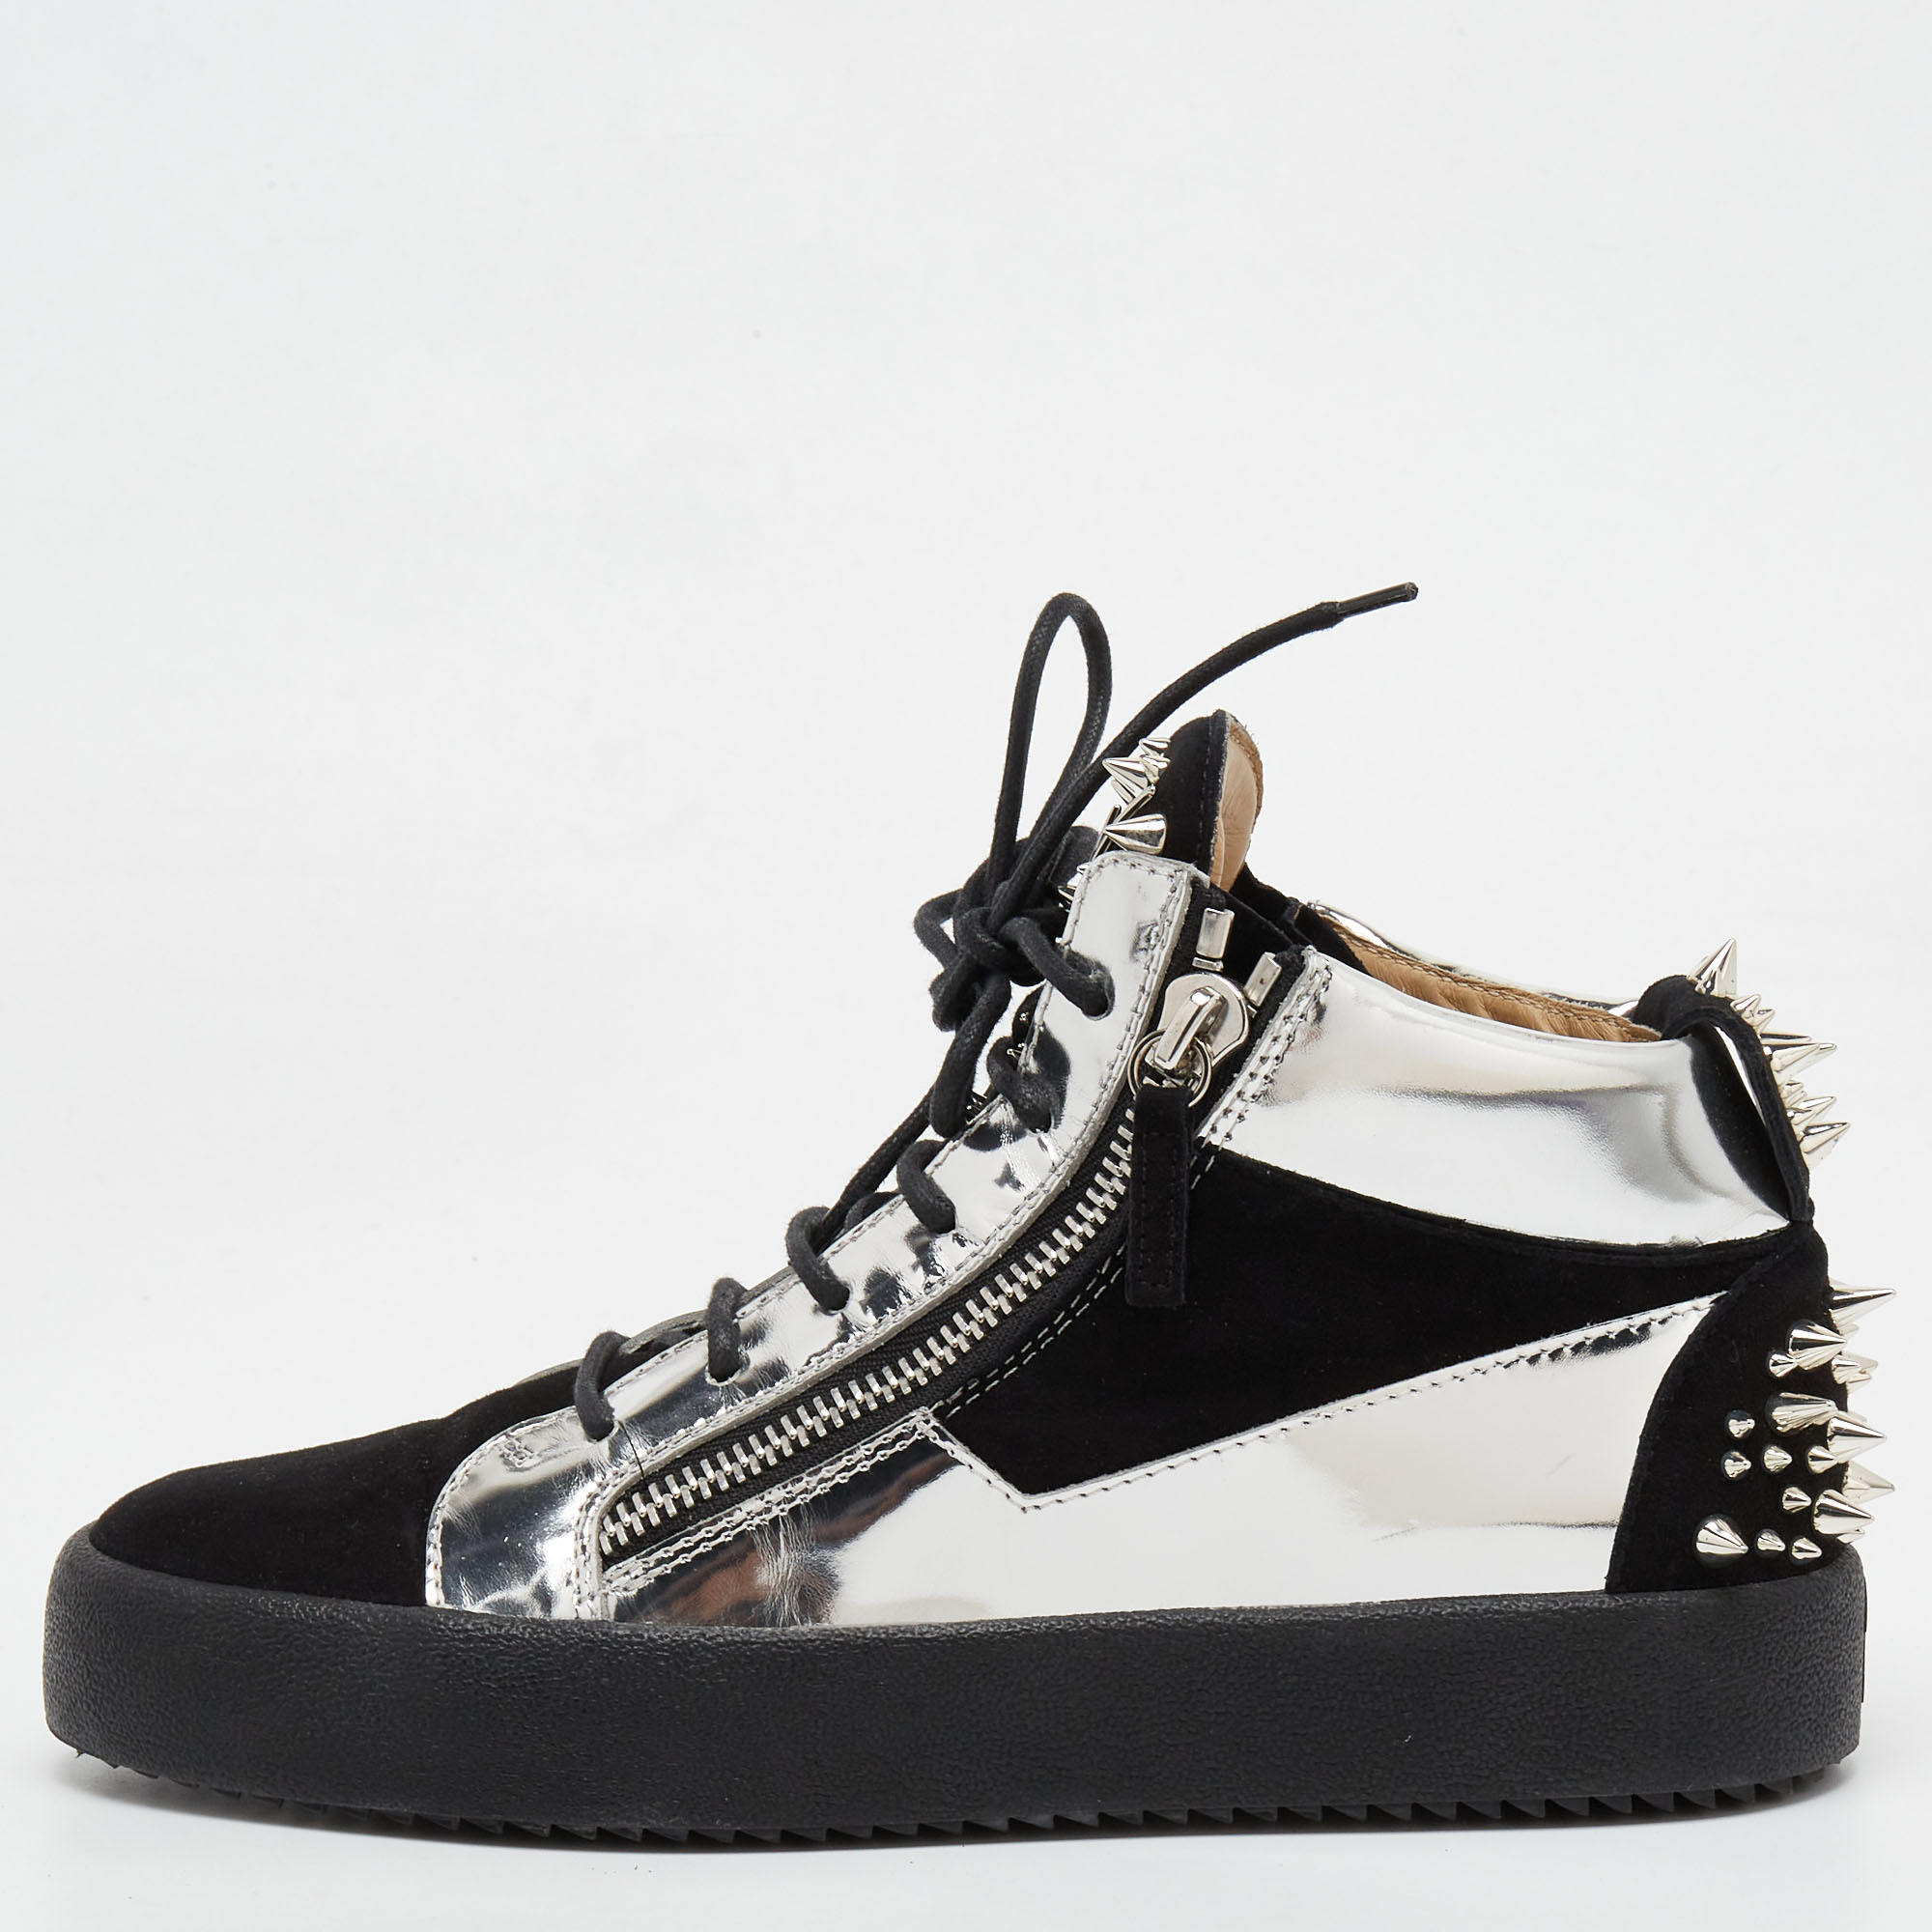 Giuseppe Zanotti Black/Silver Suede And Patent Leather Studded Jimbo Mid Top Sneakers Size 40